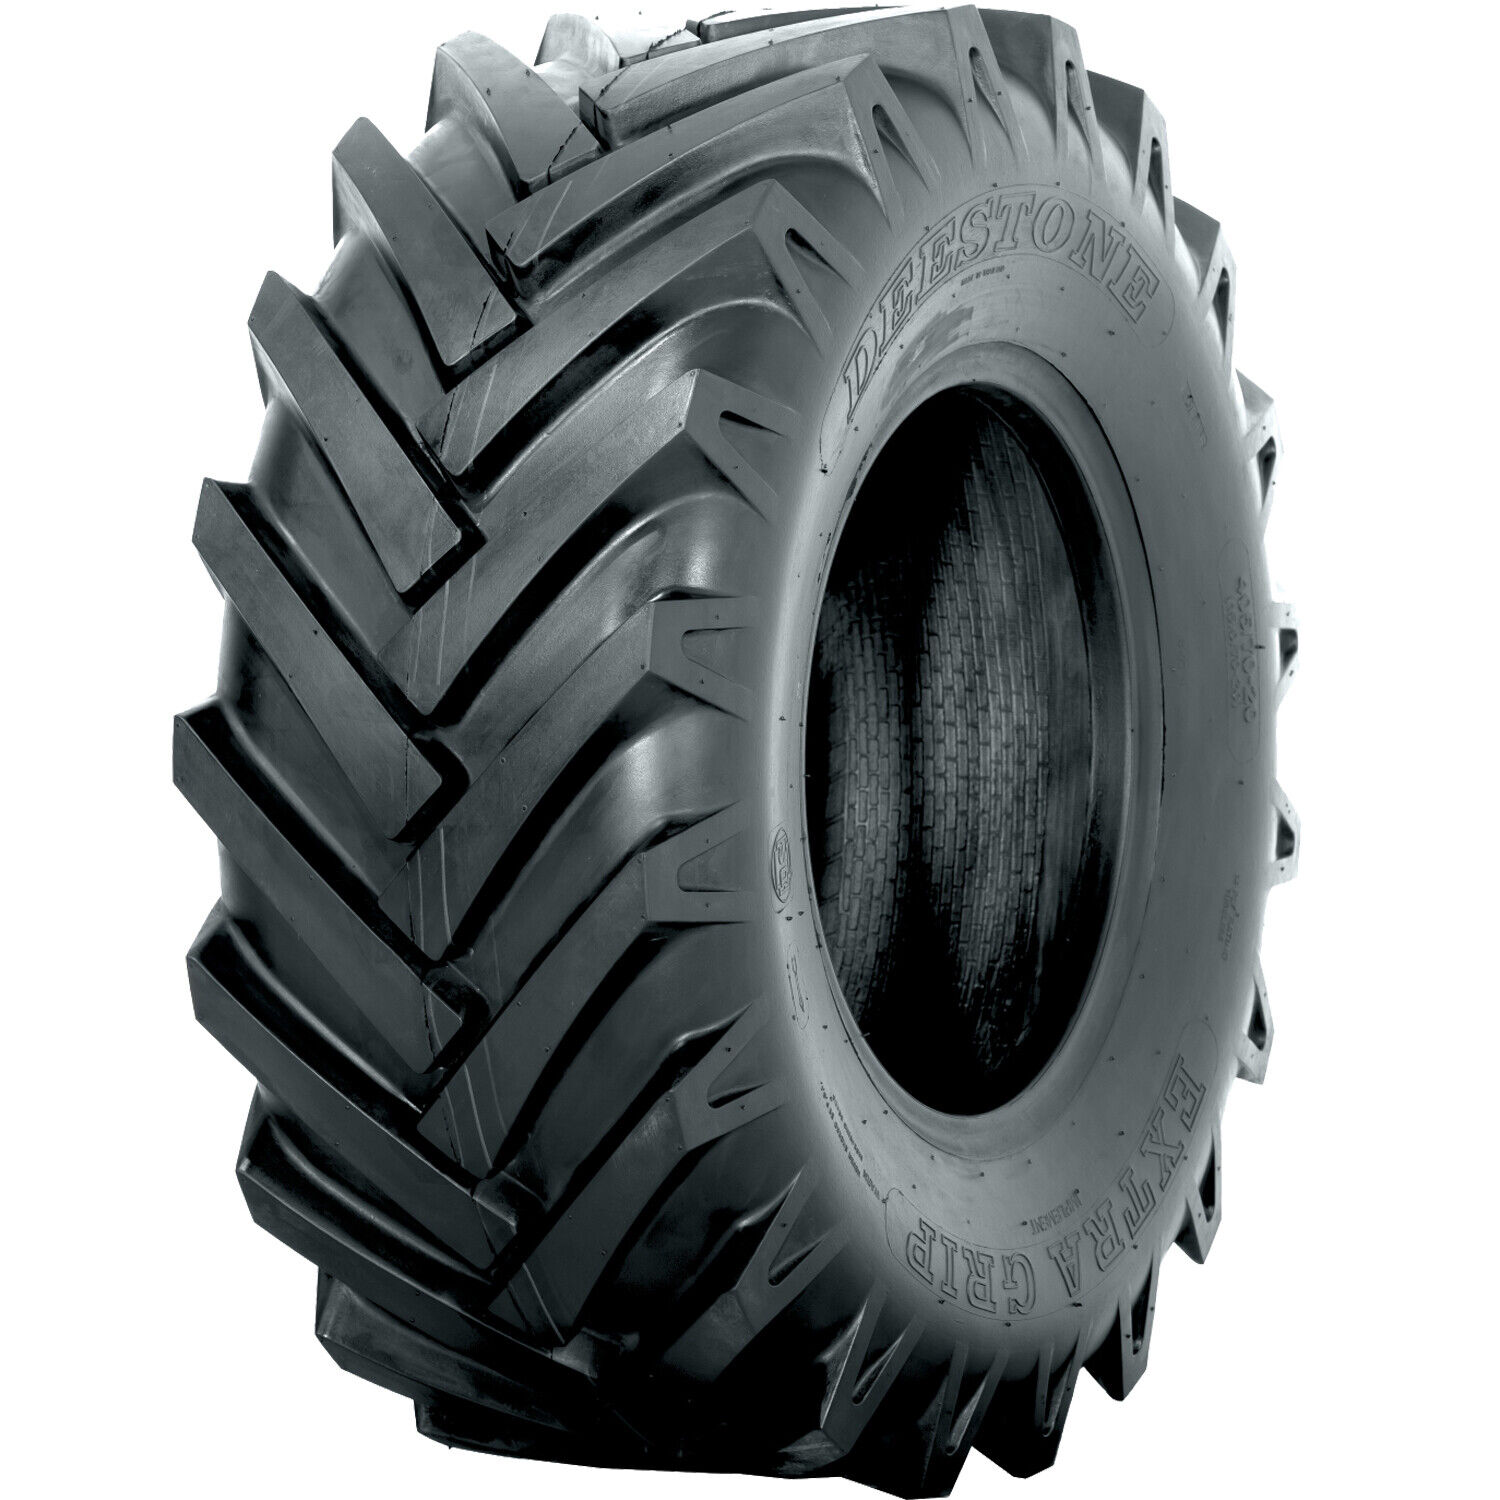 4 Tires Deestone D403 Extra Grip 405/70-20 Load 14 Ply A/S All Season Industrial